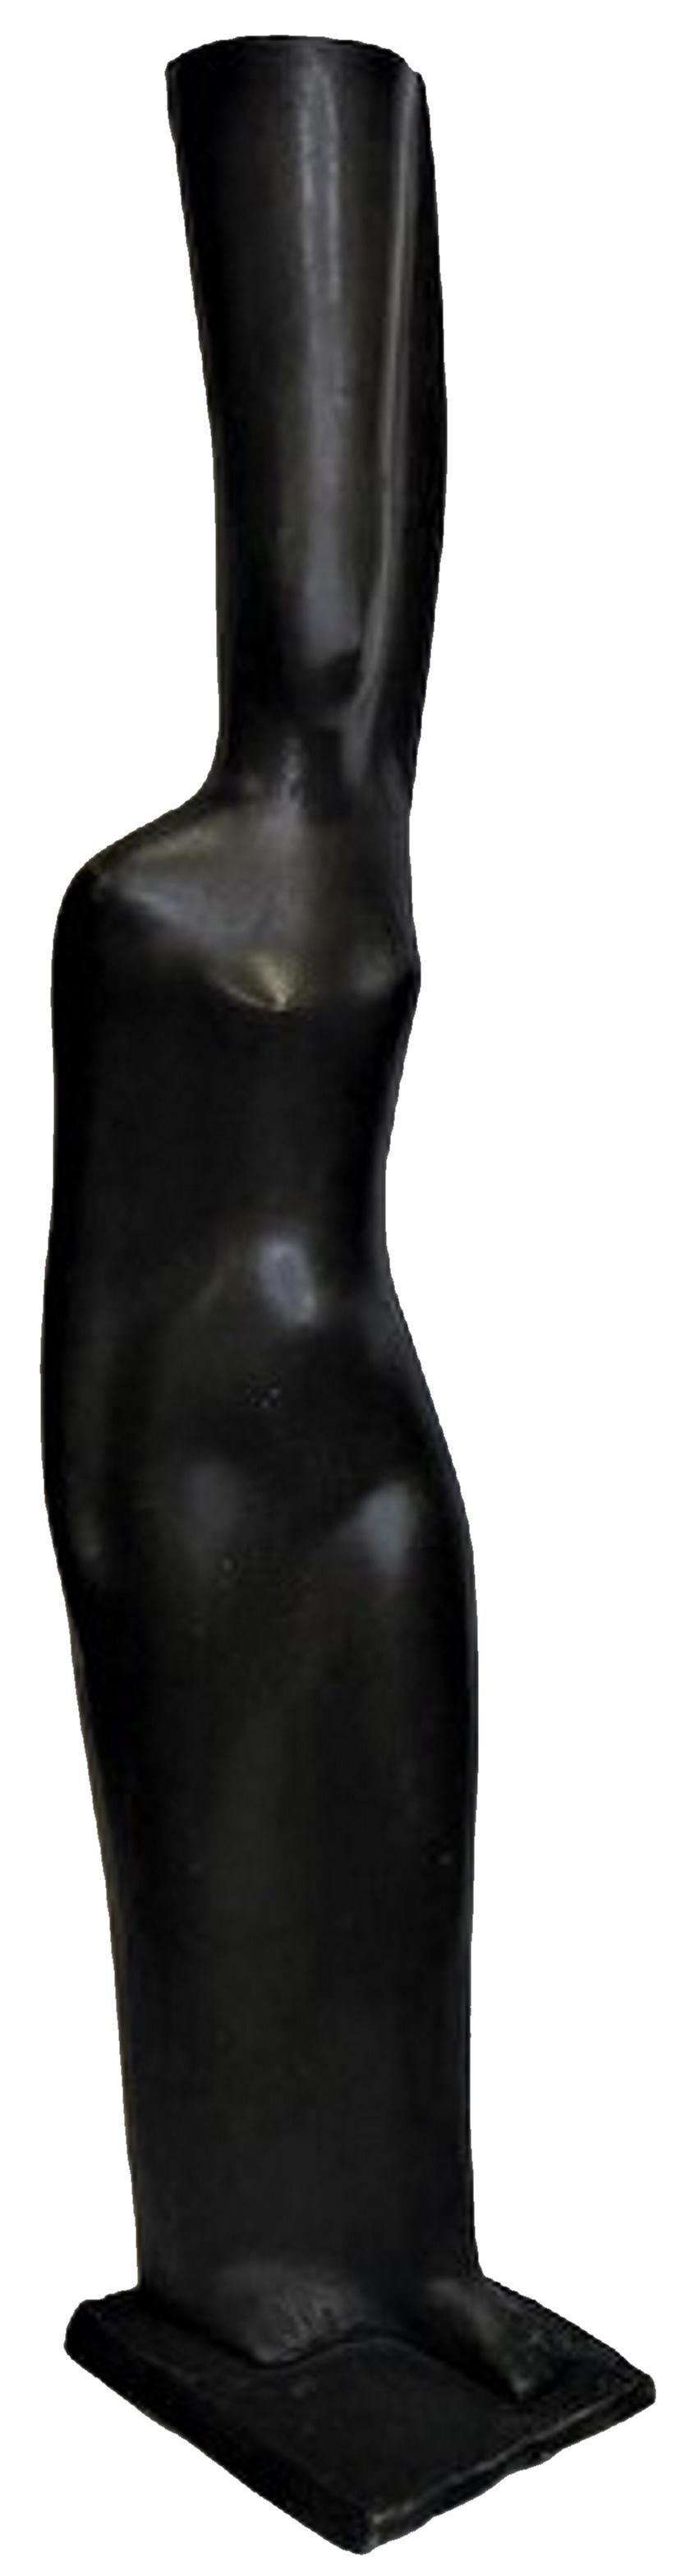 French Modernist Abstract Bronze Sculpture of a Woman Carrying a Vessel, c. 1960 For Sale 5